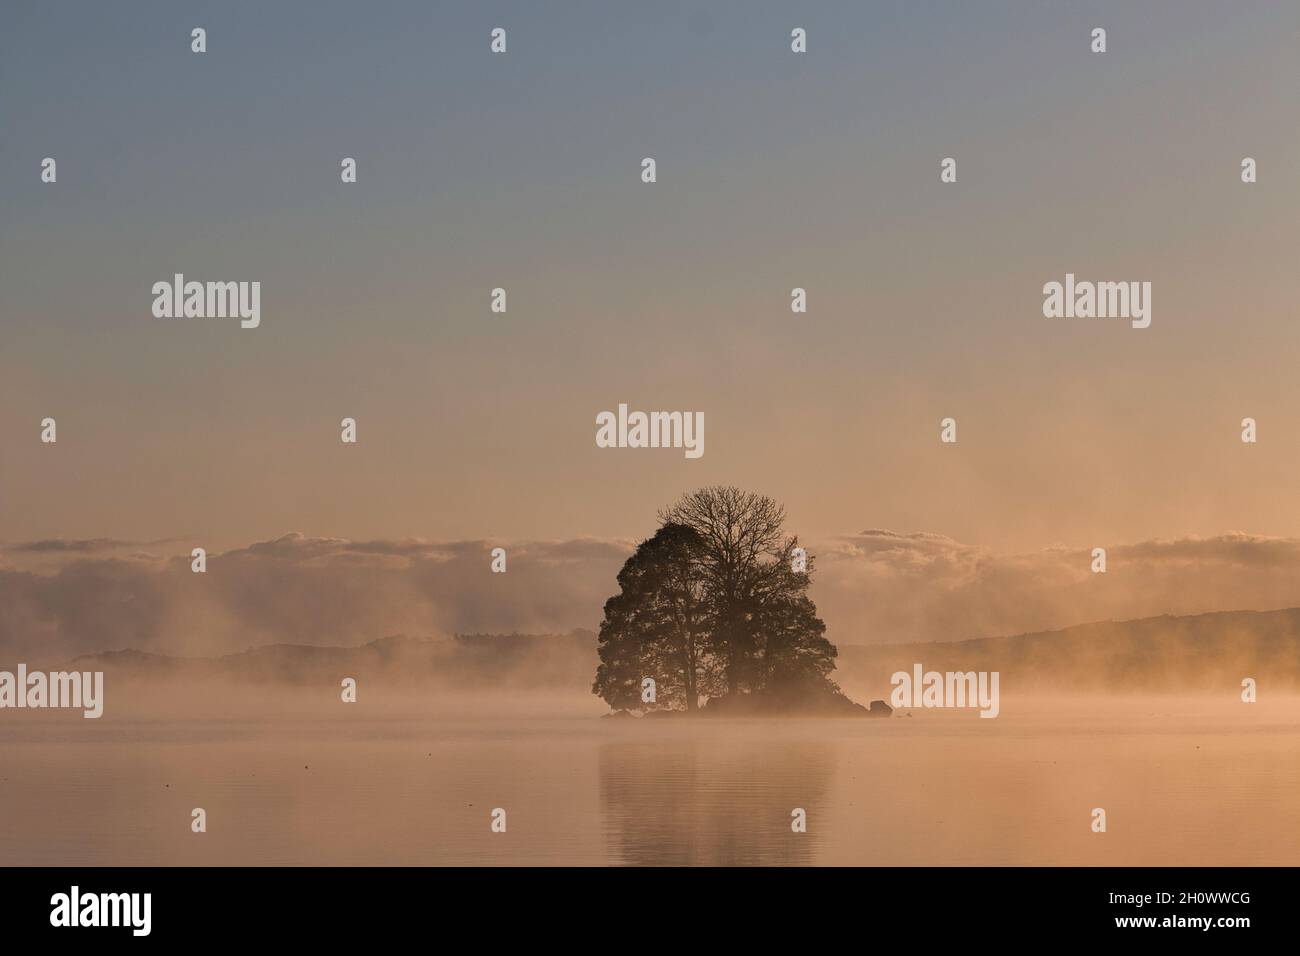 A single island on a misty sunlit lake at dawn Stock Photo